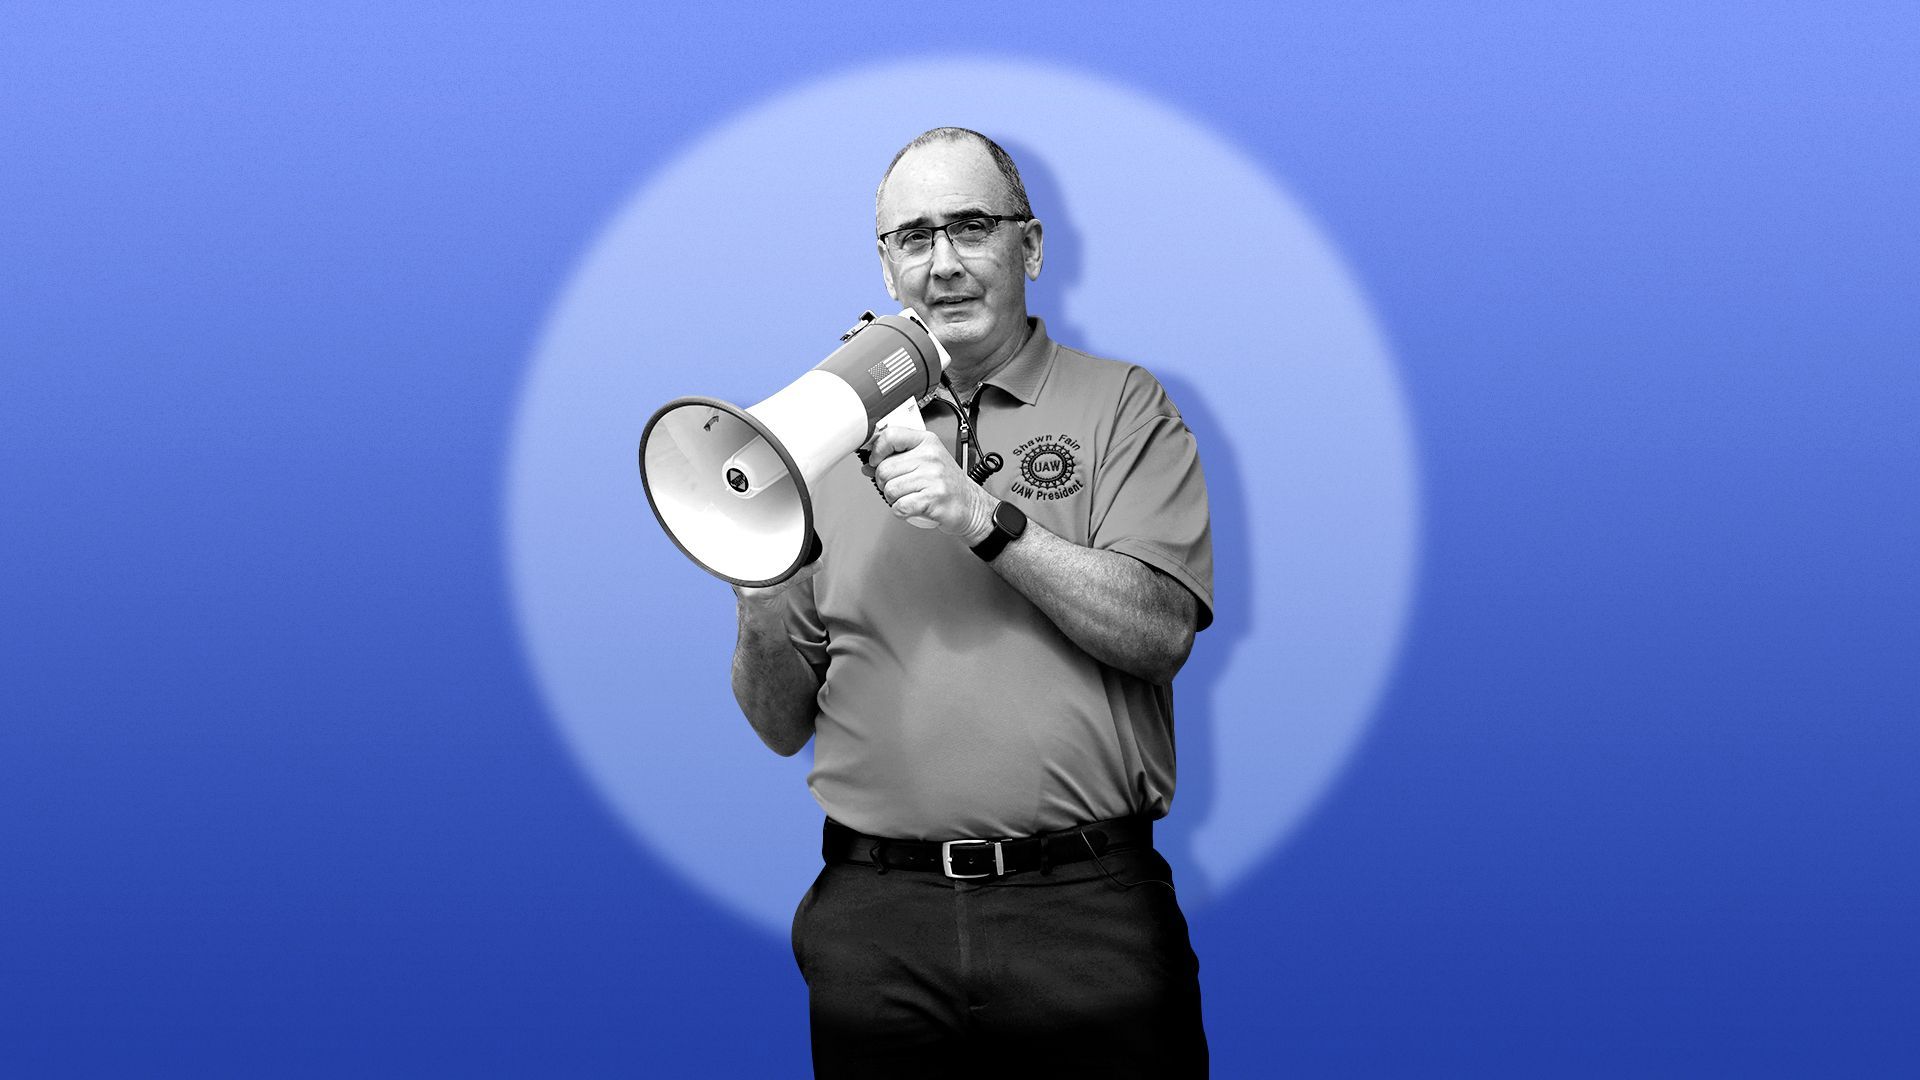 Photo Illustration of Shawn Fain with a megaphone in a spotlight